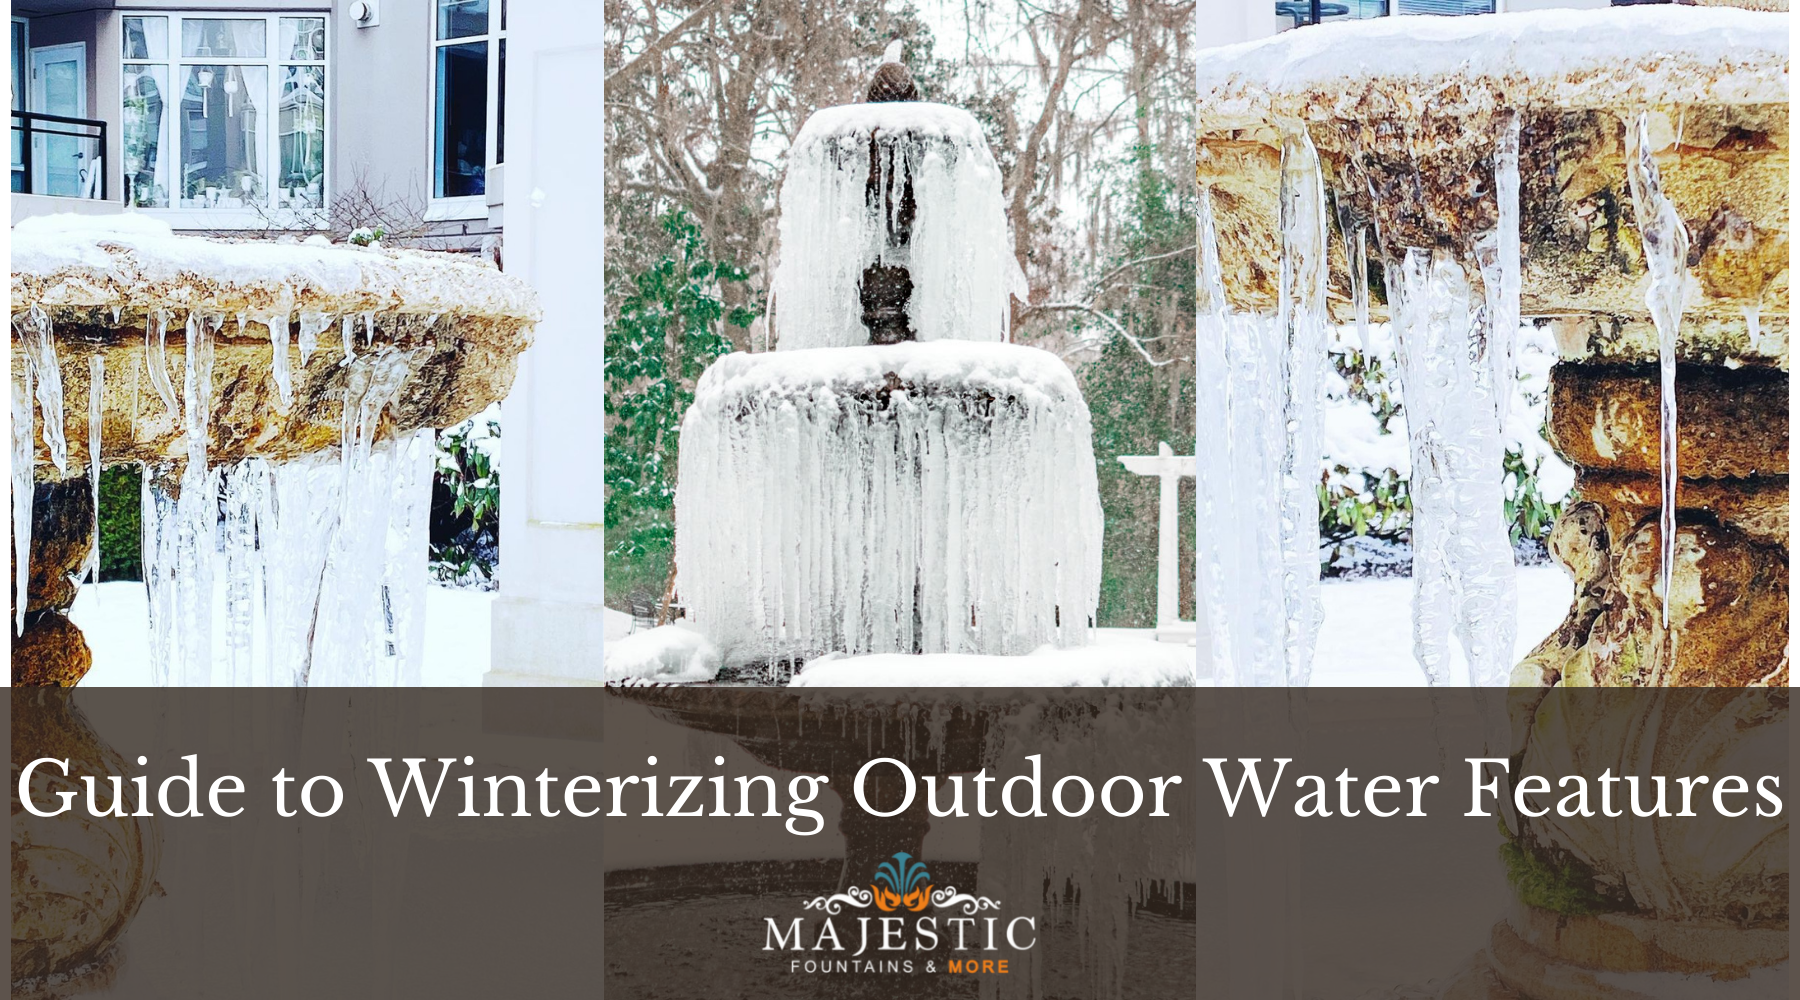 I. Introduction to Winterizing Water Features